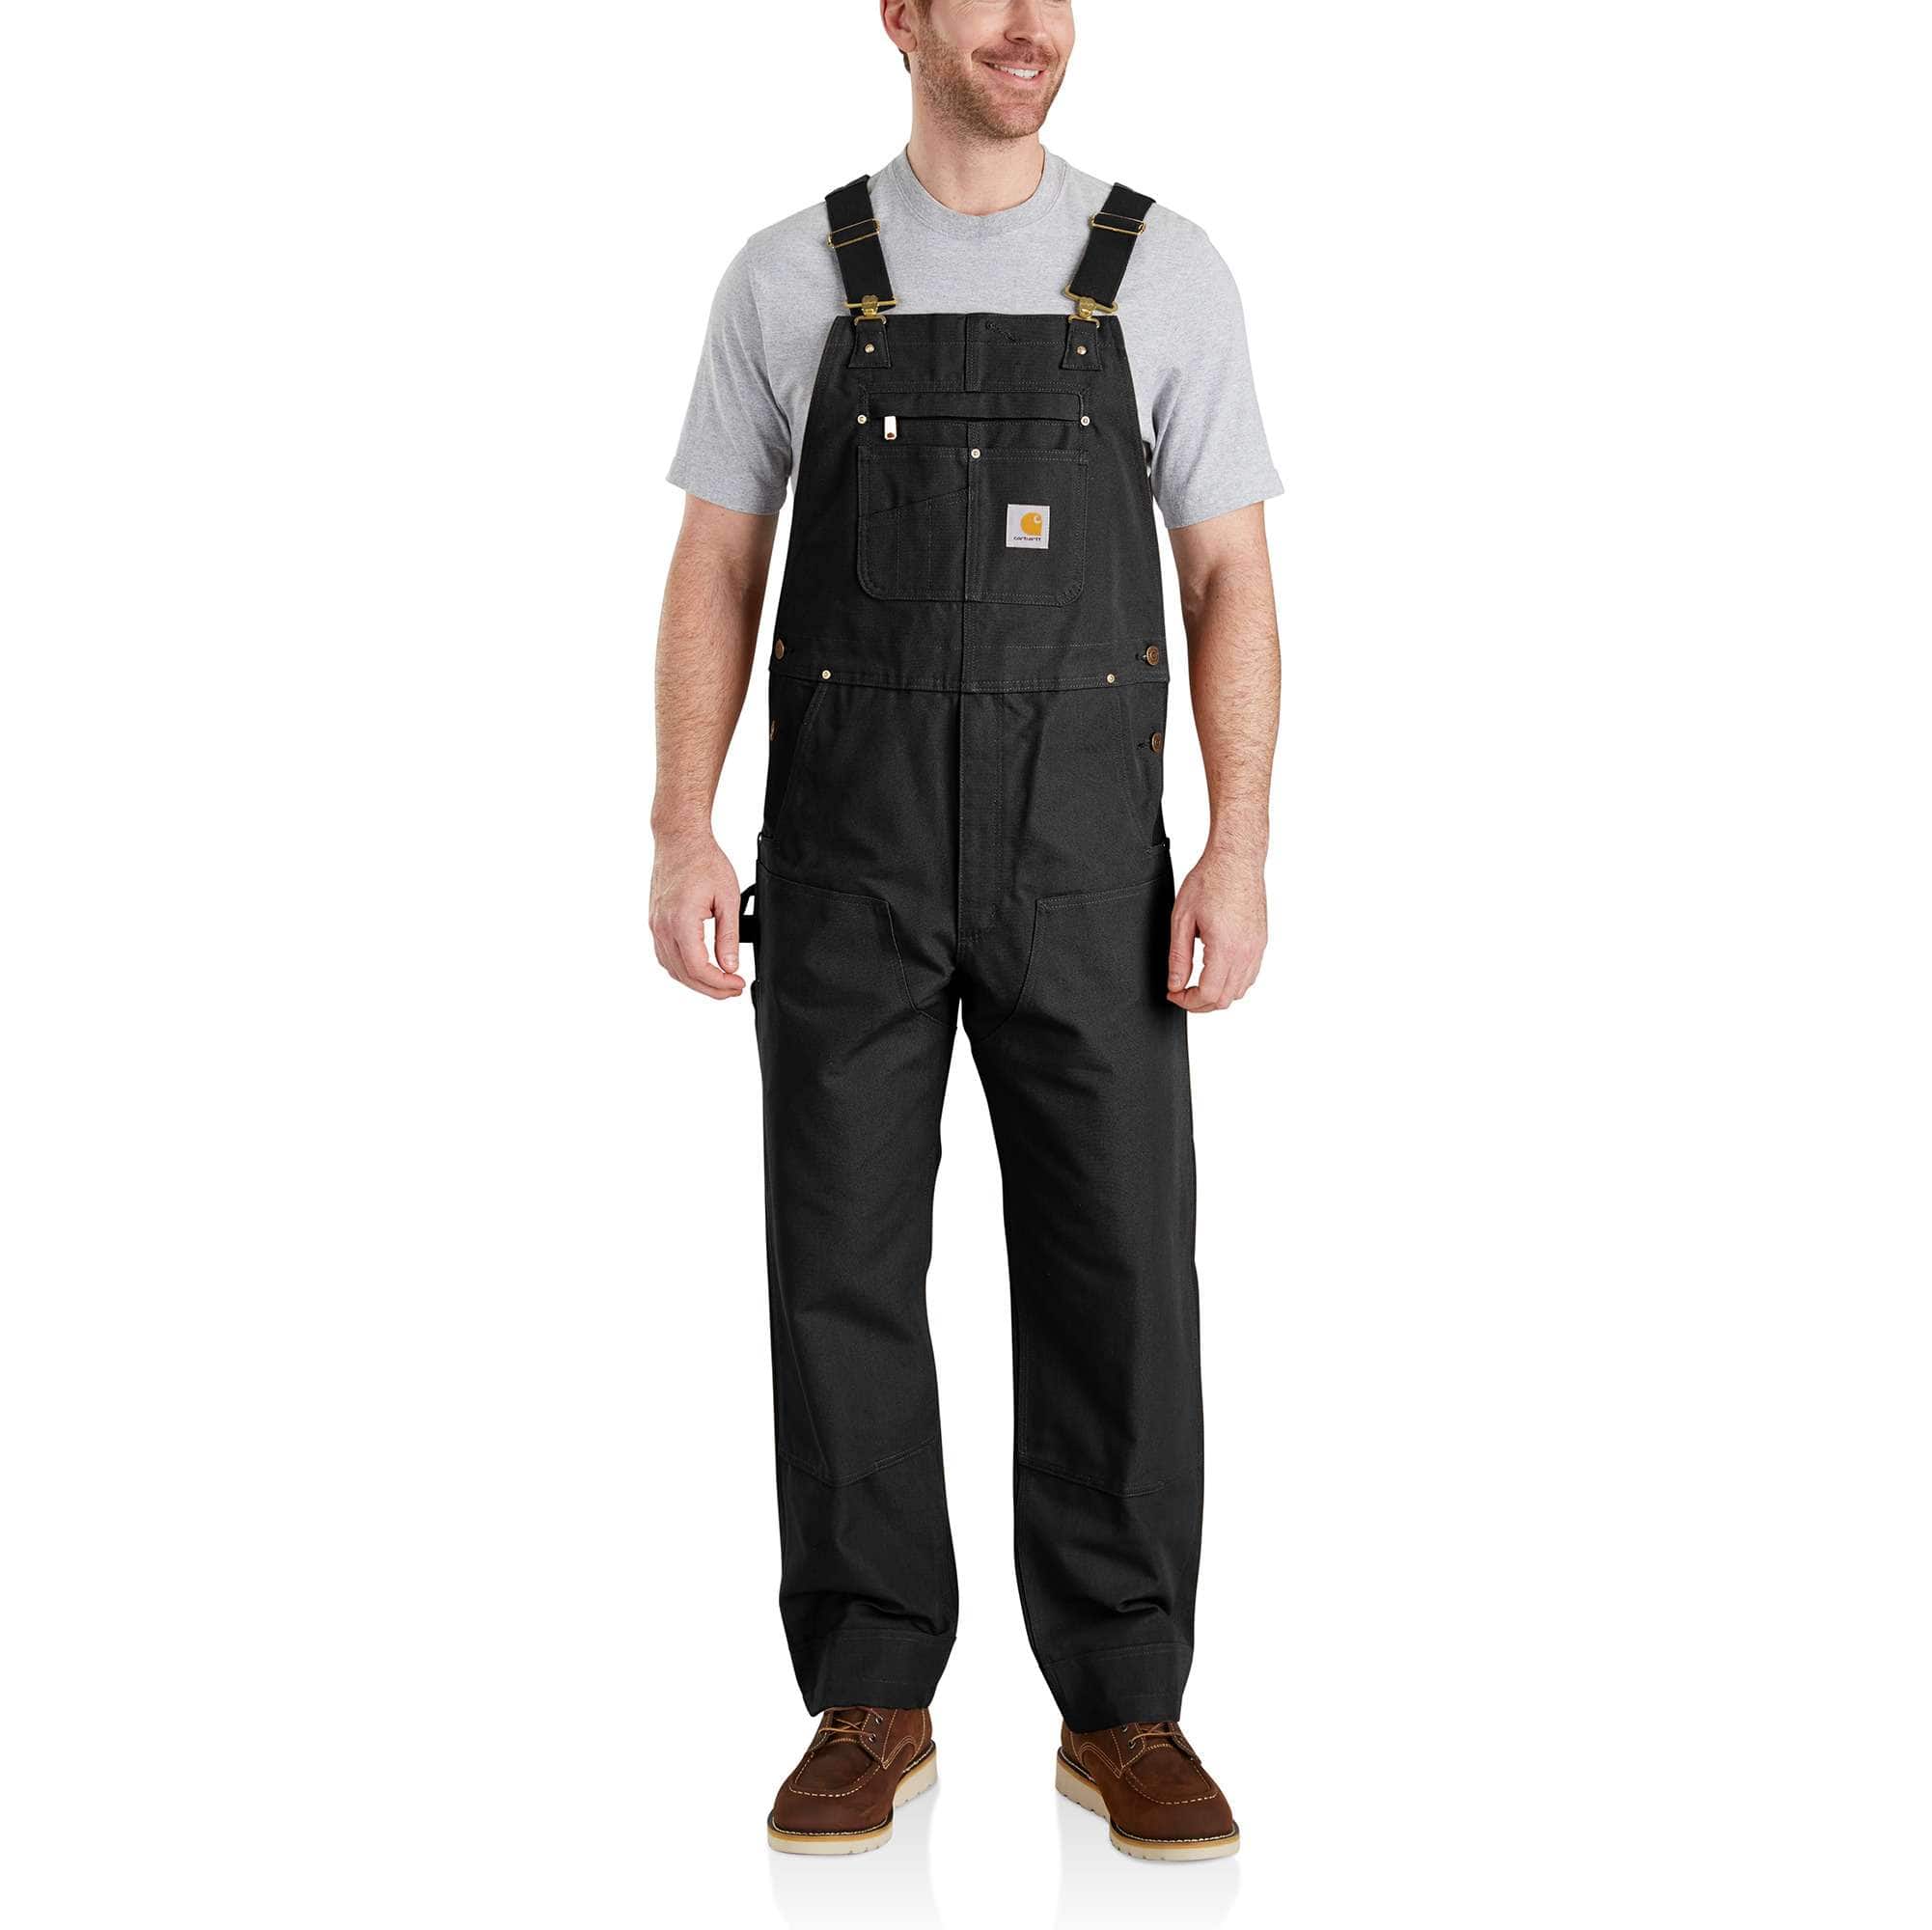 Men's Bib Overall - Relaxed Fit Duck